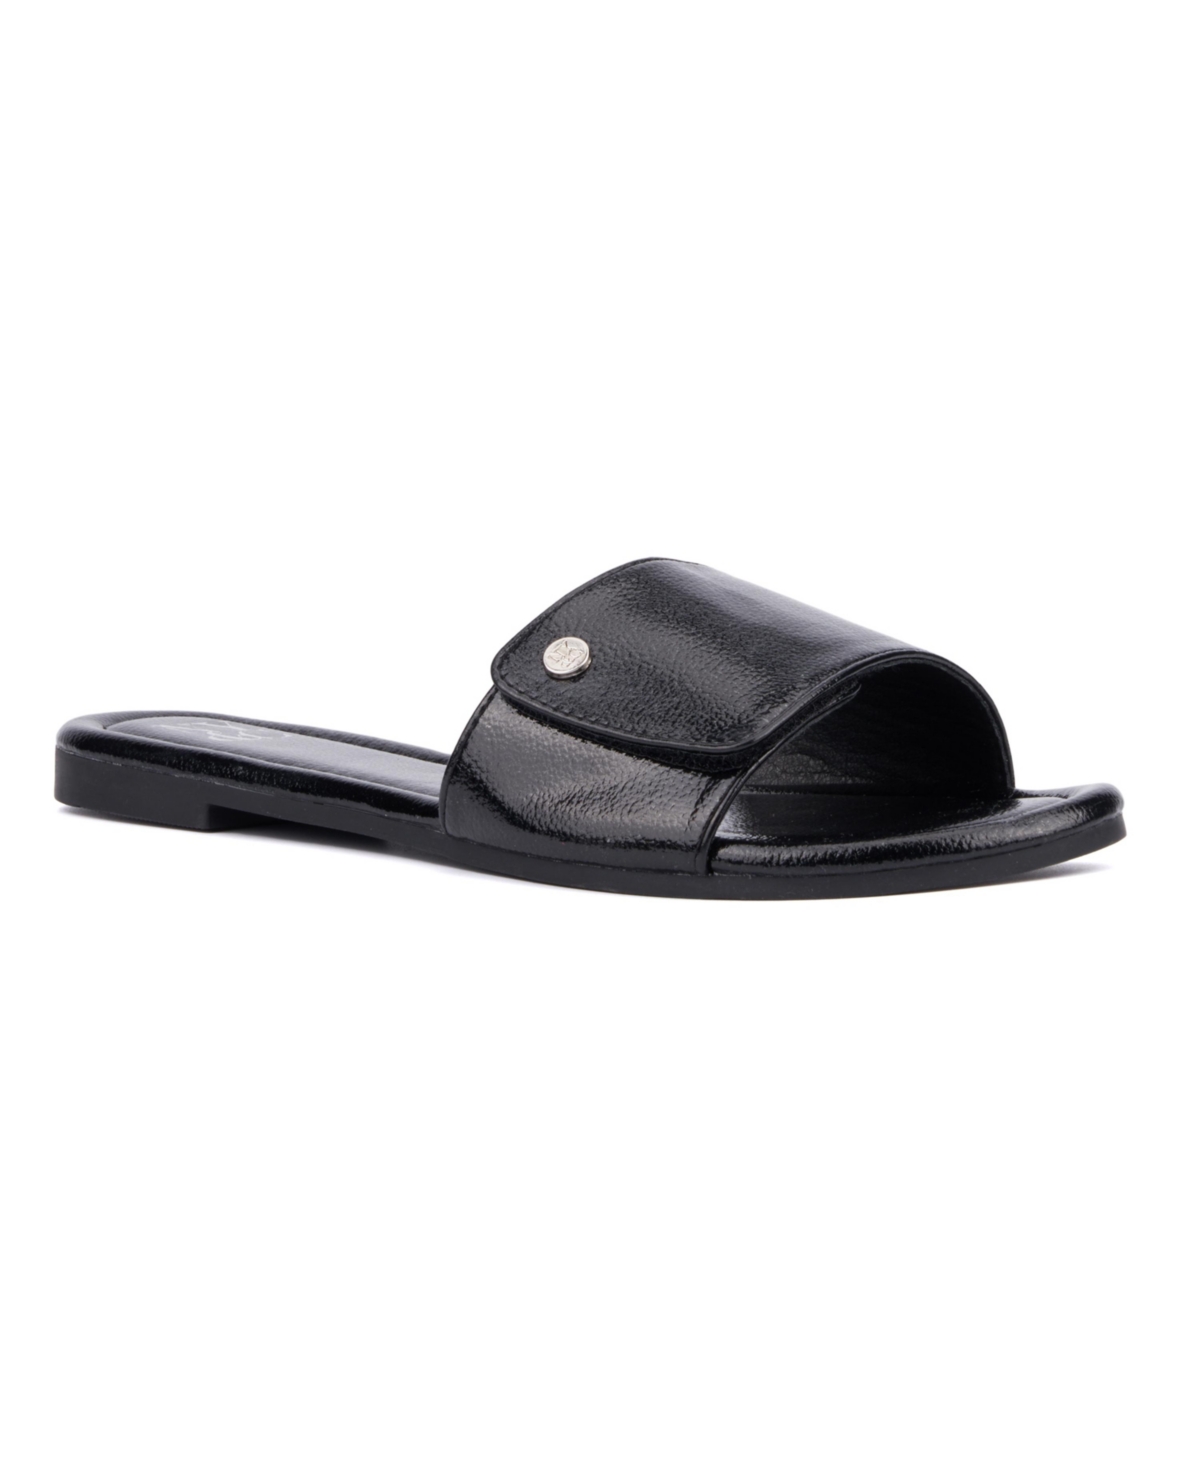 NEW YORK AND COMPANY WOMEN'S ADELLE FLAT SANDAL